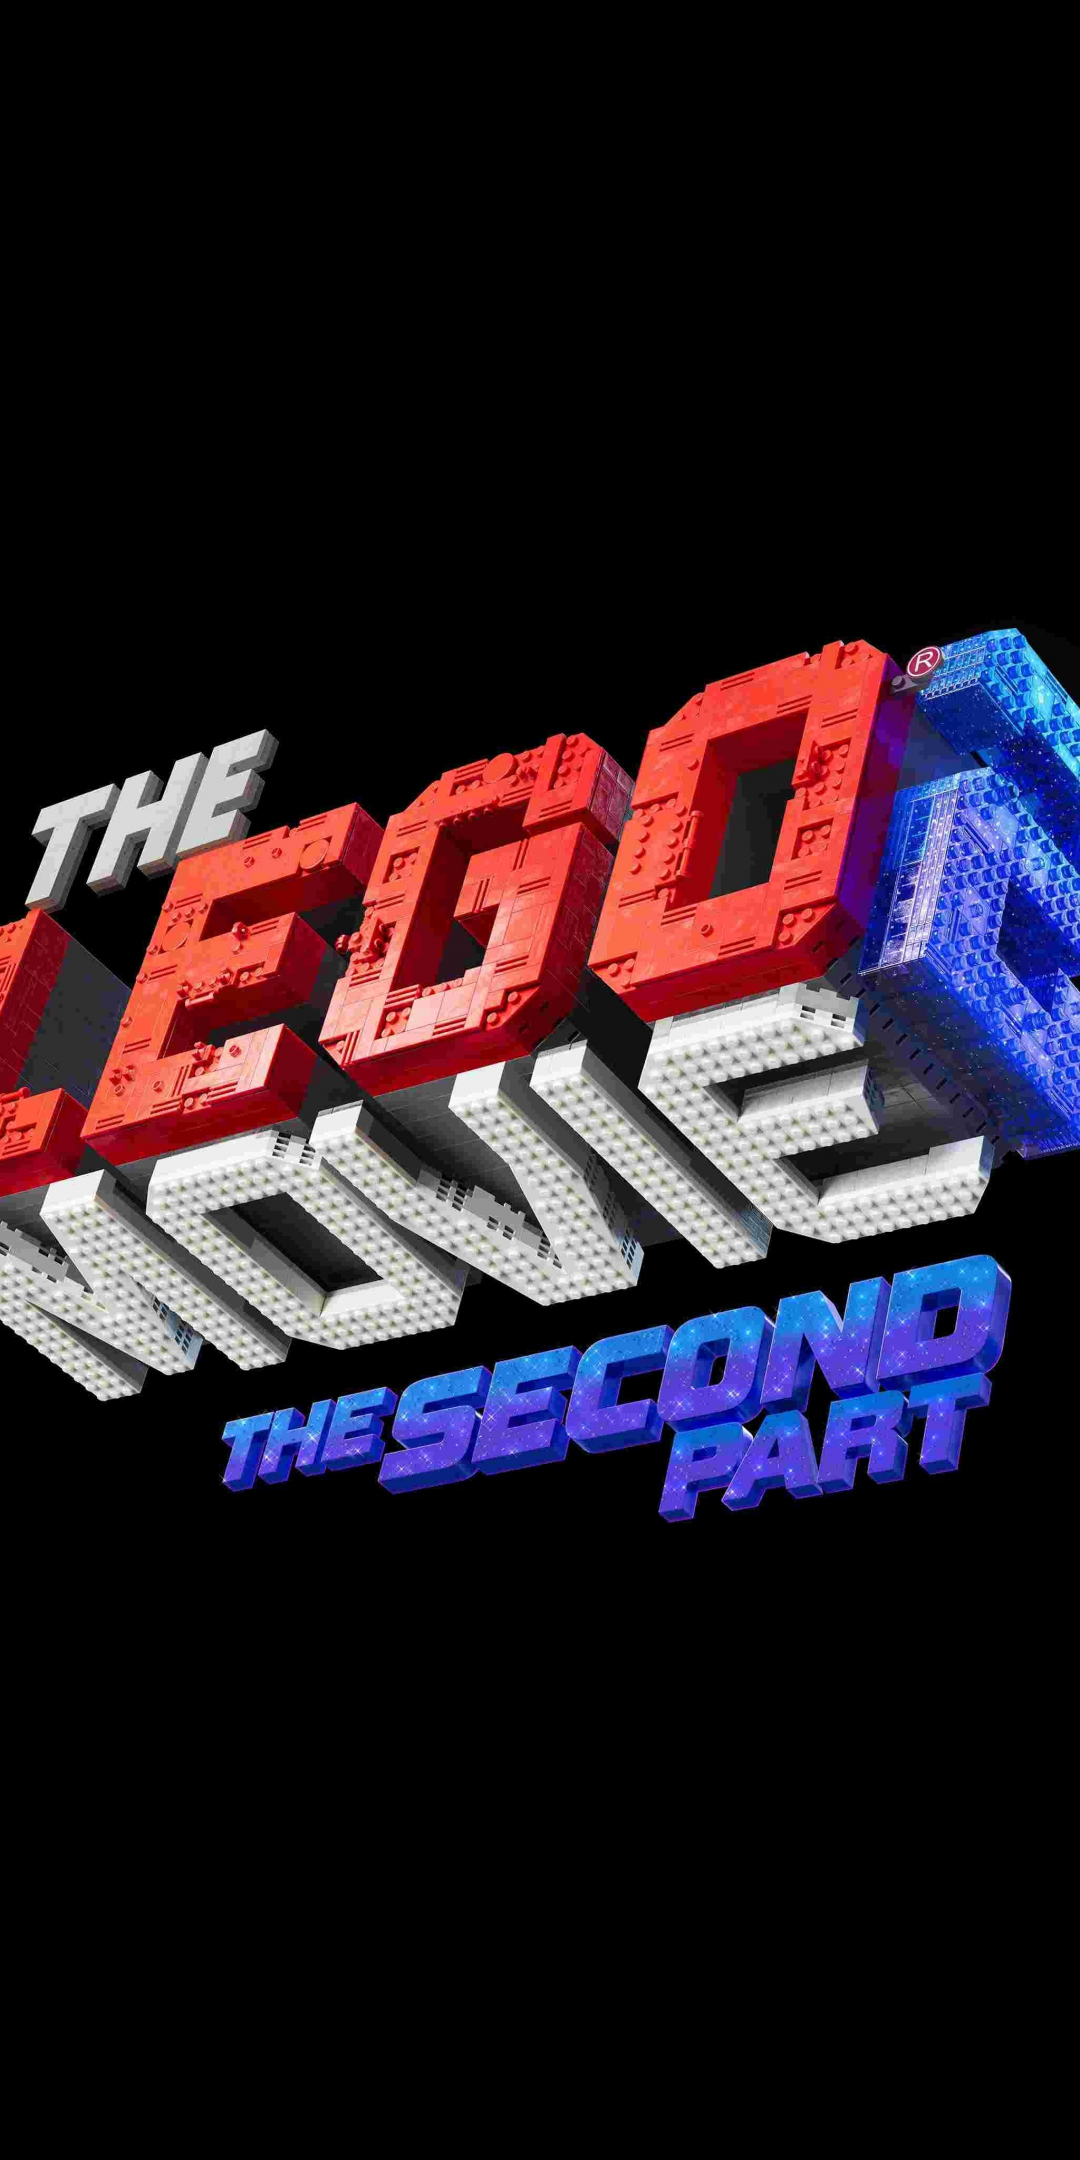 The Lego Movie 2: The Second Part, poster, 2019 movie, 1080x2160 wallpaper